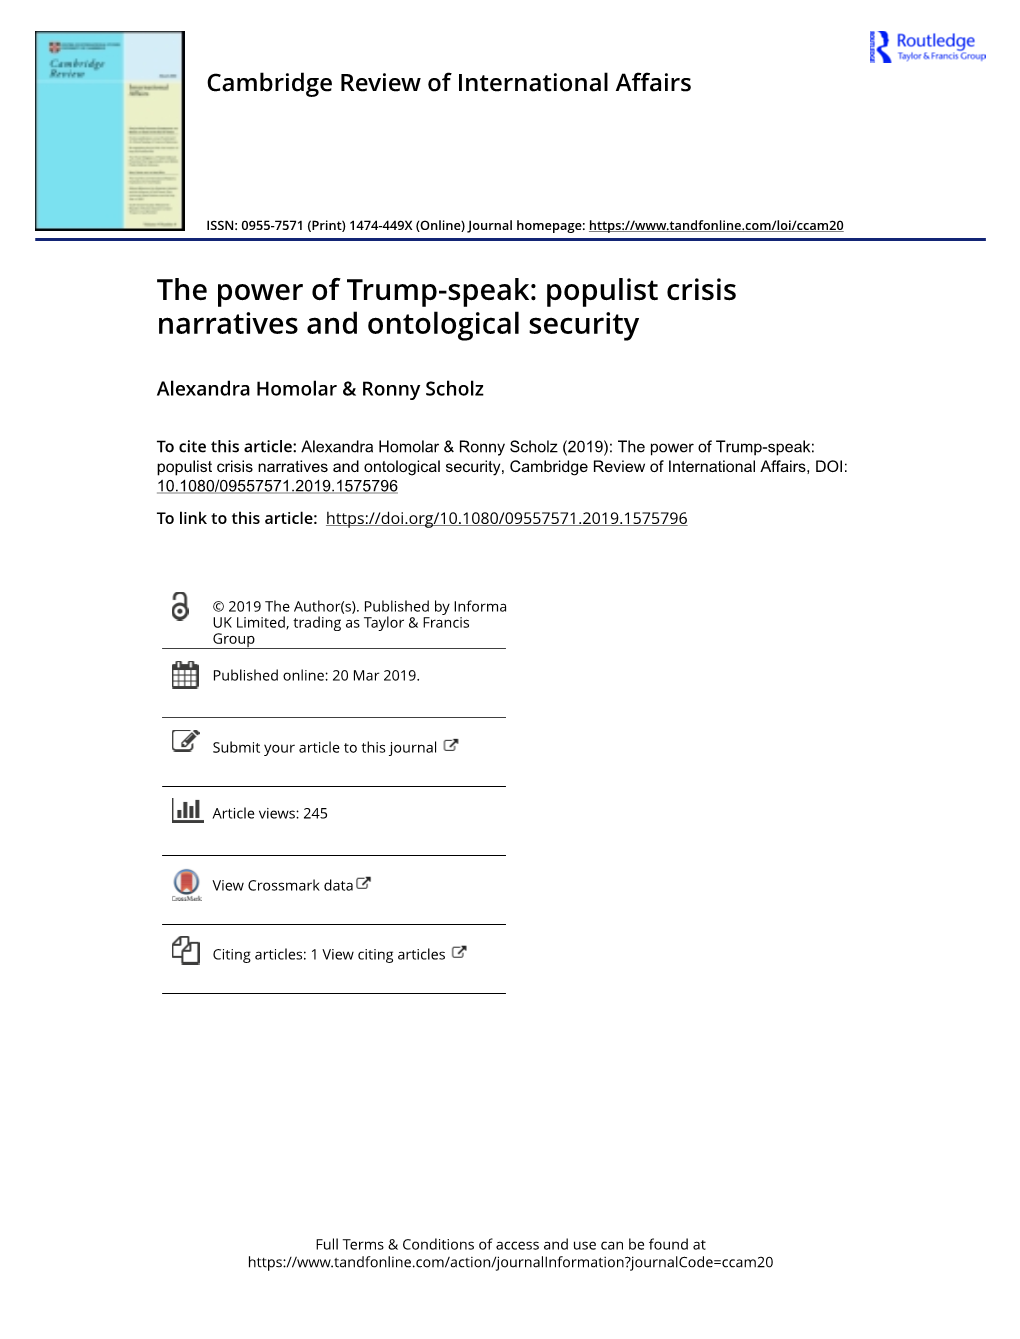 The Power of Trump-Speak: Populist Crisis Narratives and Ontological Security